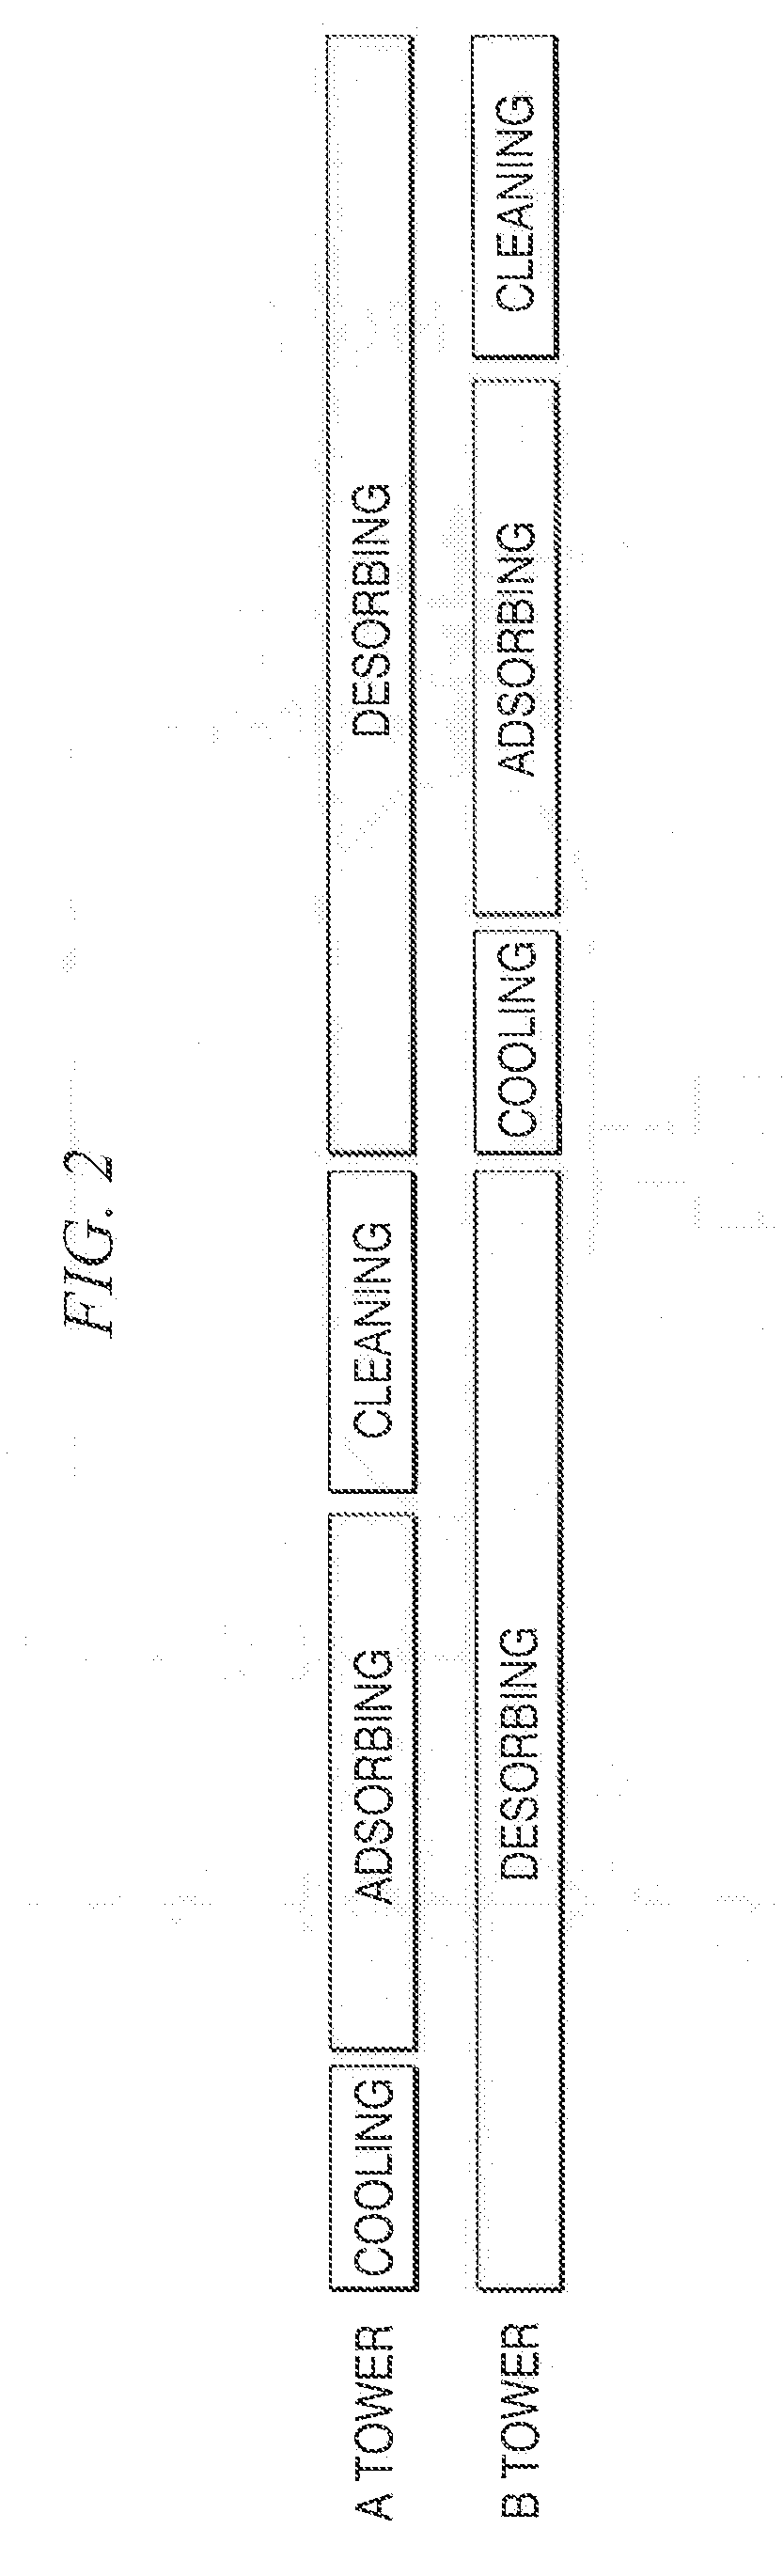 Hybrid adsorbent and method of capturing carbon dioxide in gas